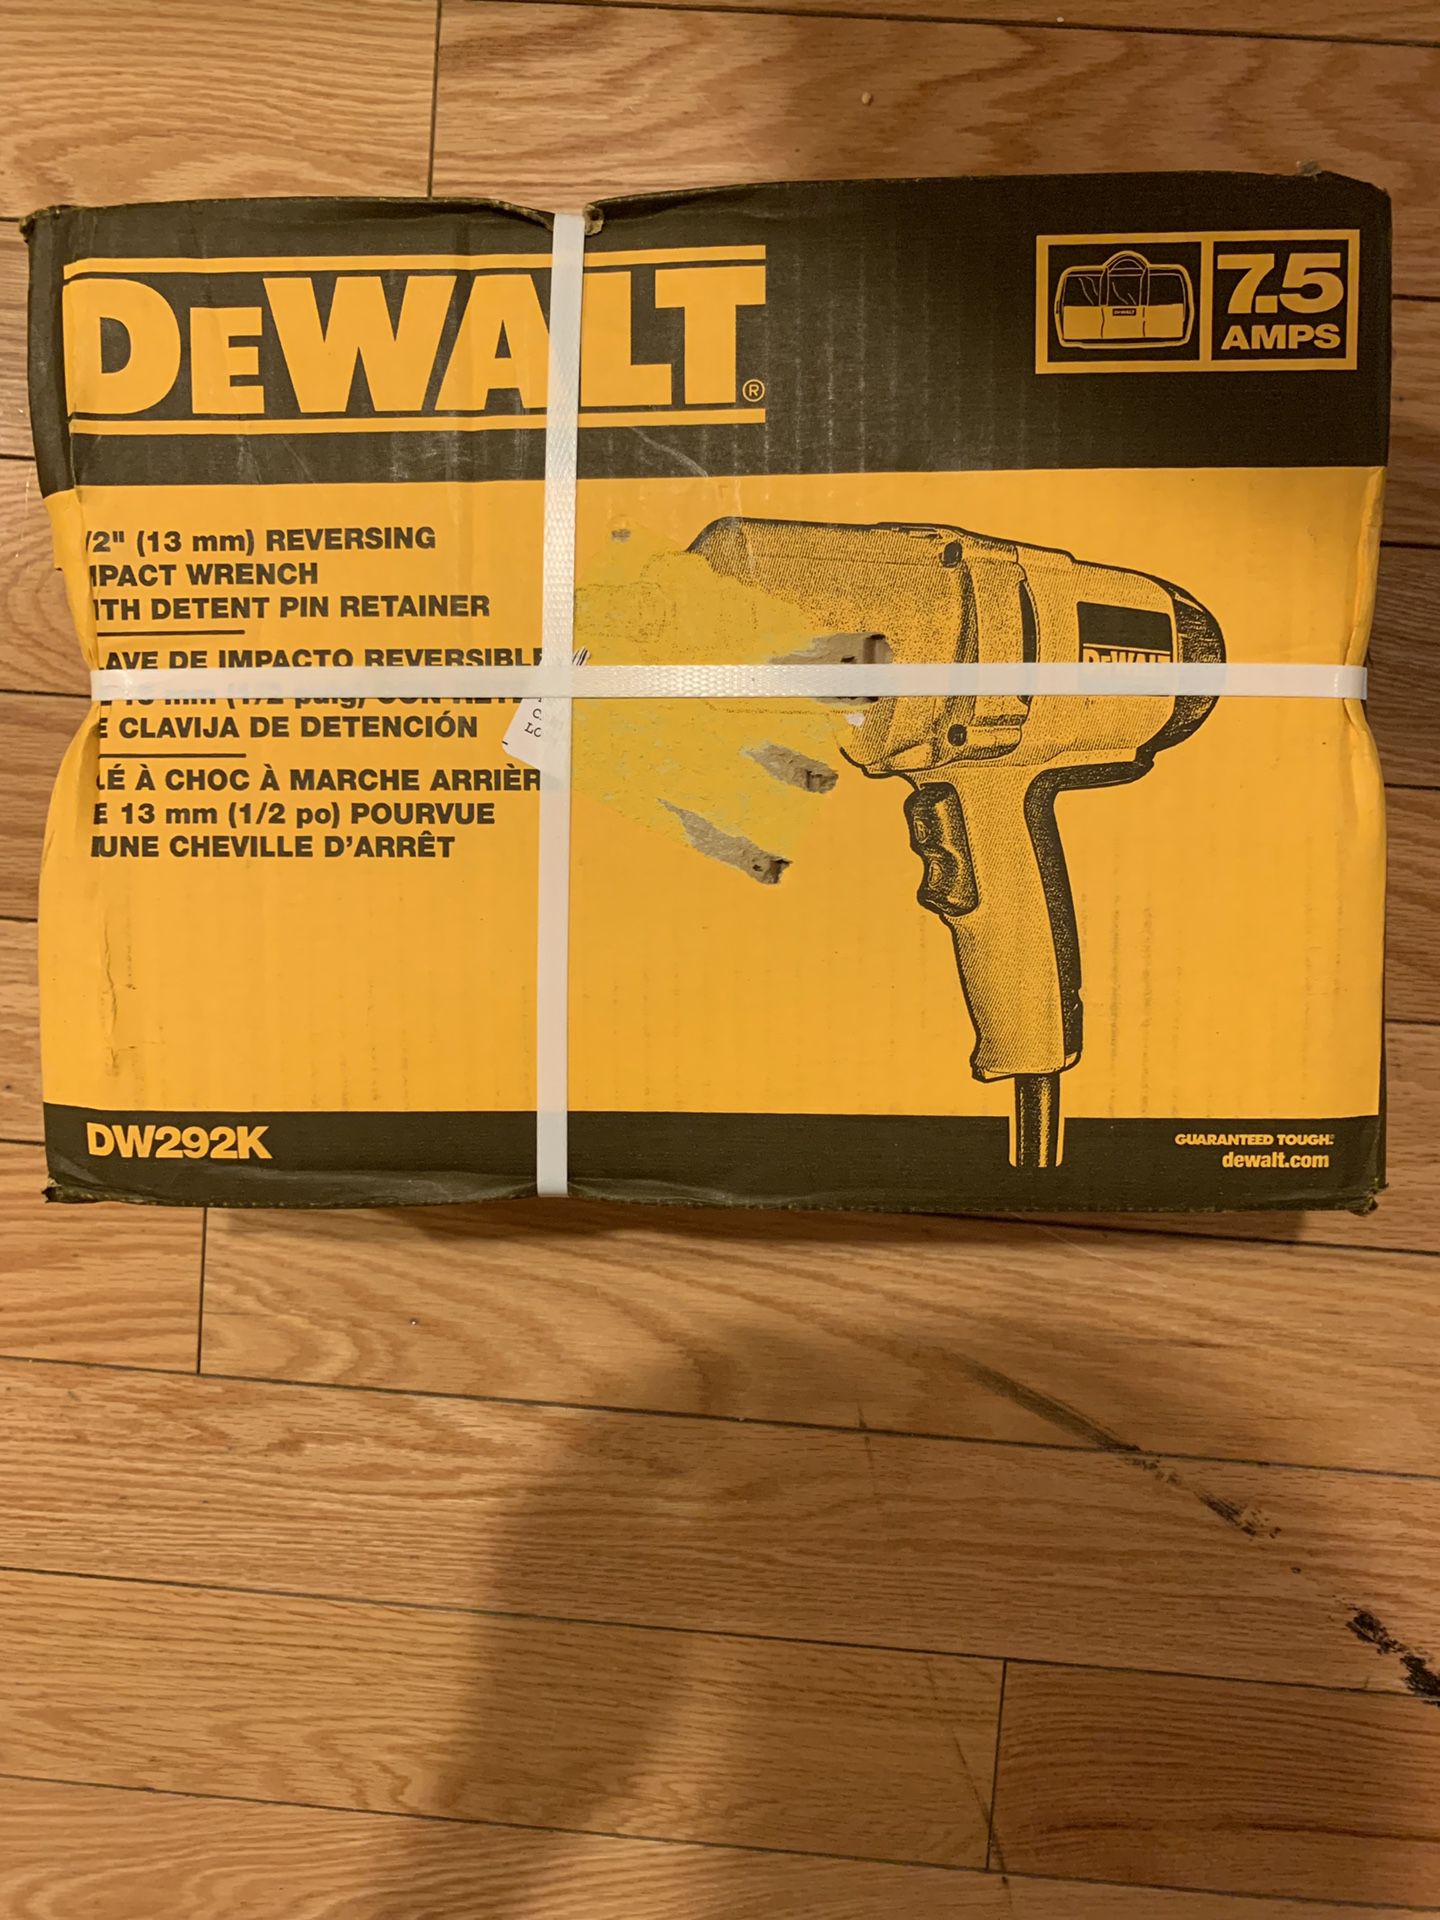 50% OFF BRAND NEW Dewalt 7.5-Amp 1/2-in Corded Impact Wrench